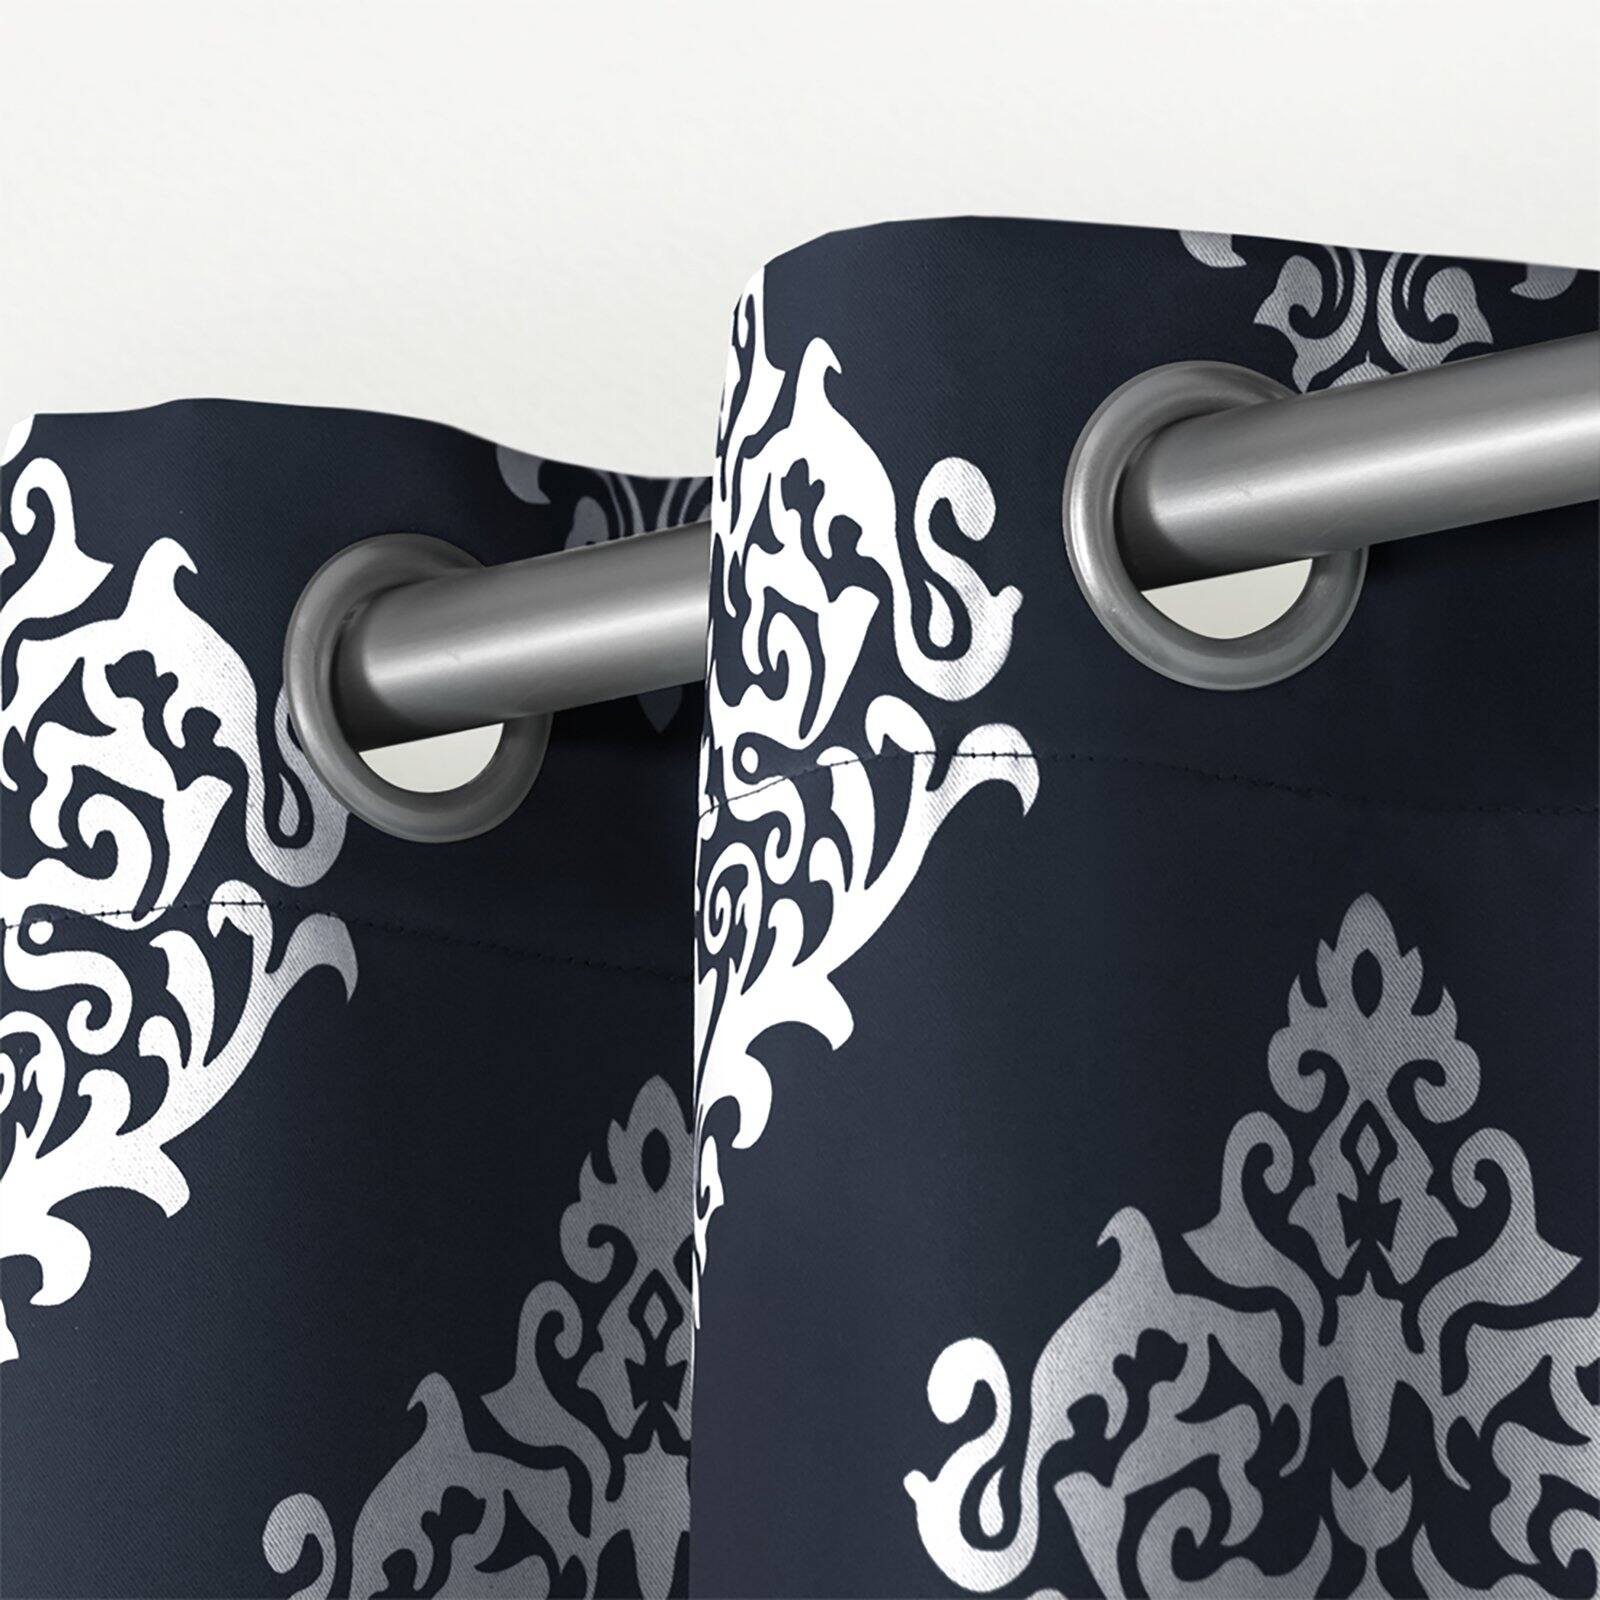 Exclusive Home Medallion Room Darkening Blackout Grommet Top Curtain Panel Pair, 52"x84", Peacoat Blue - image 1 of 5